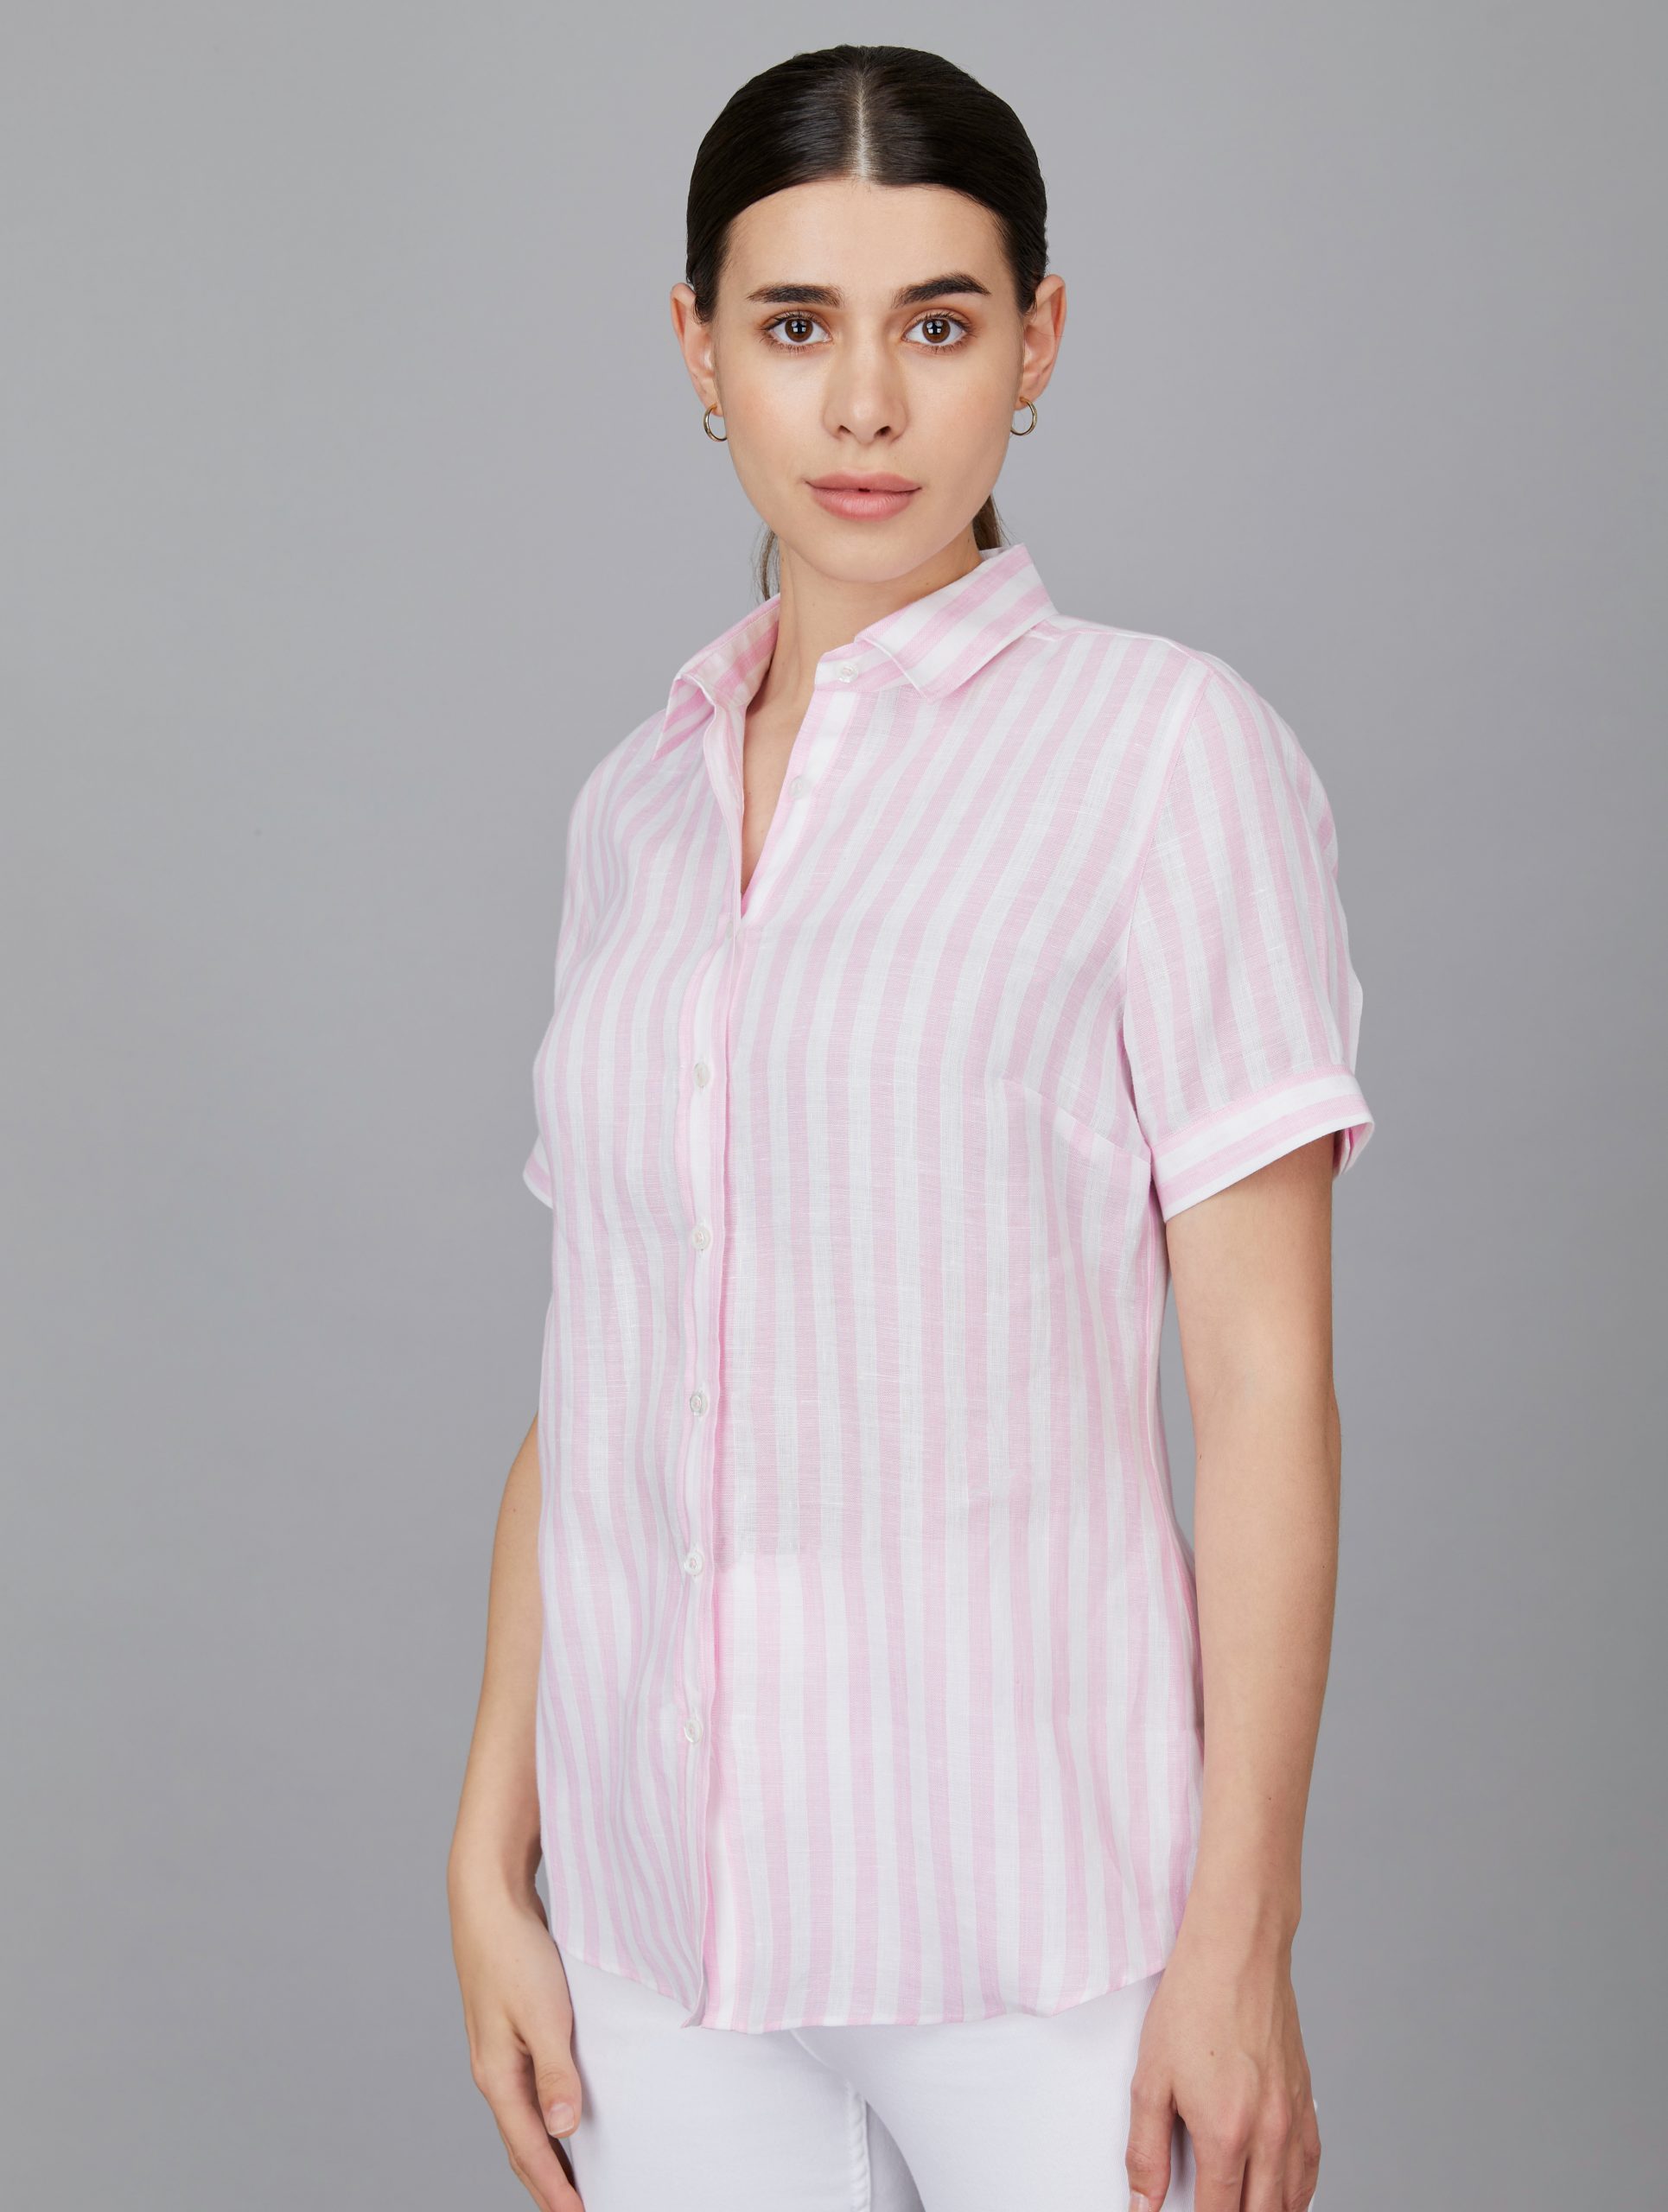 Short-Sleeve Shirt in Pink-White